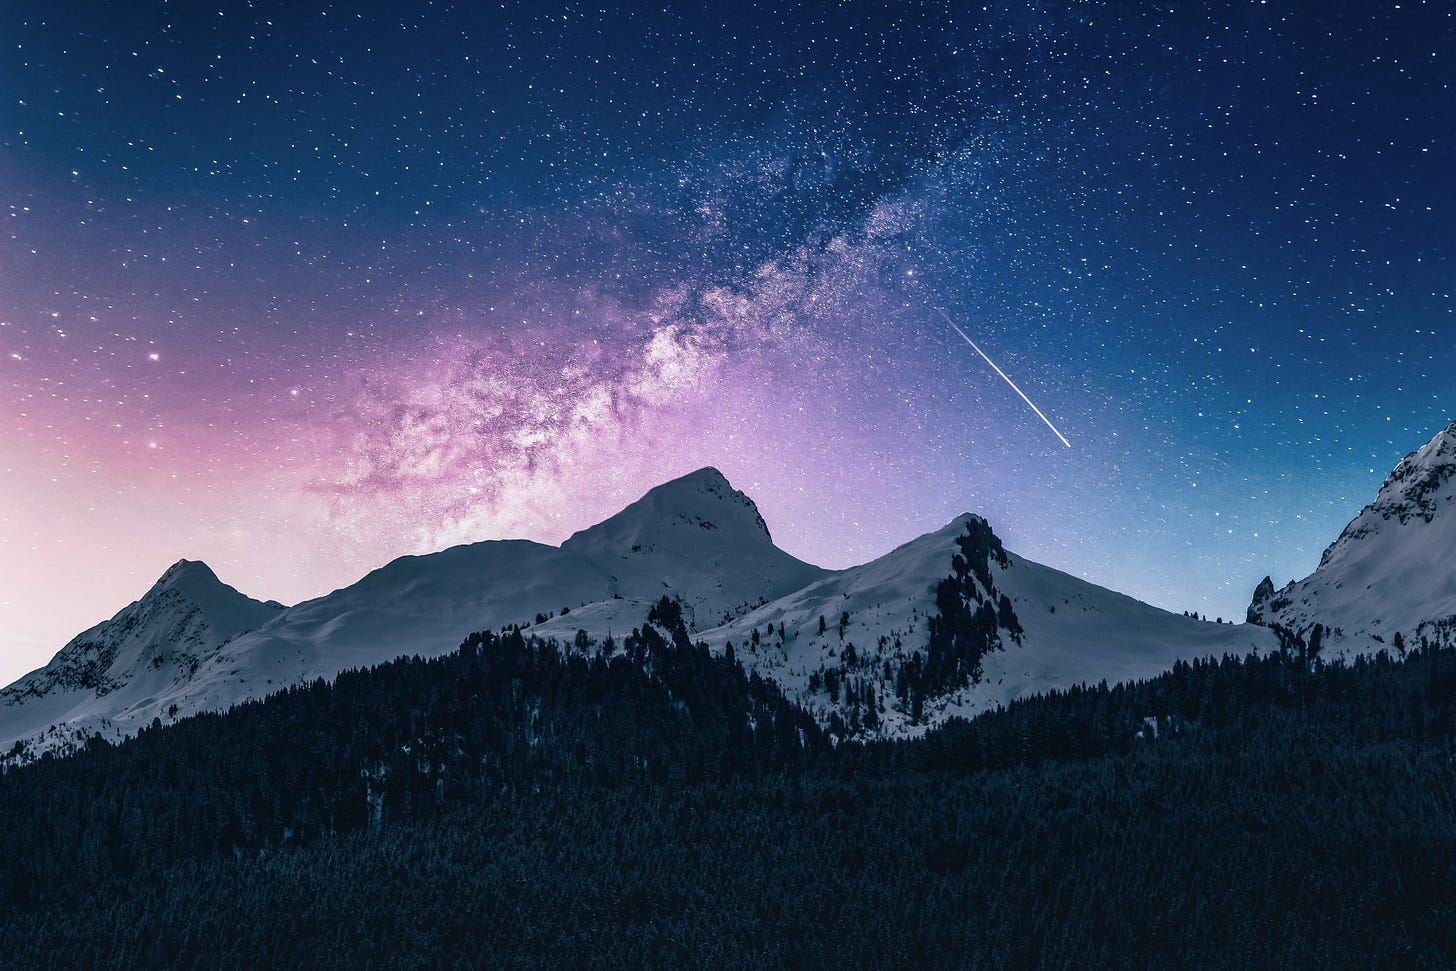 A snowy mountain range, with a forest in the foreground and the night sky behind. The sky is pink fading into blue with the milky way at the centre and a sea of stars.